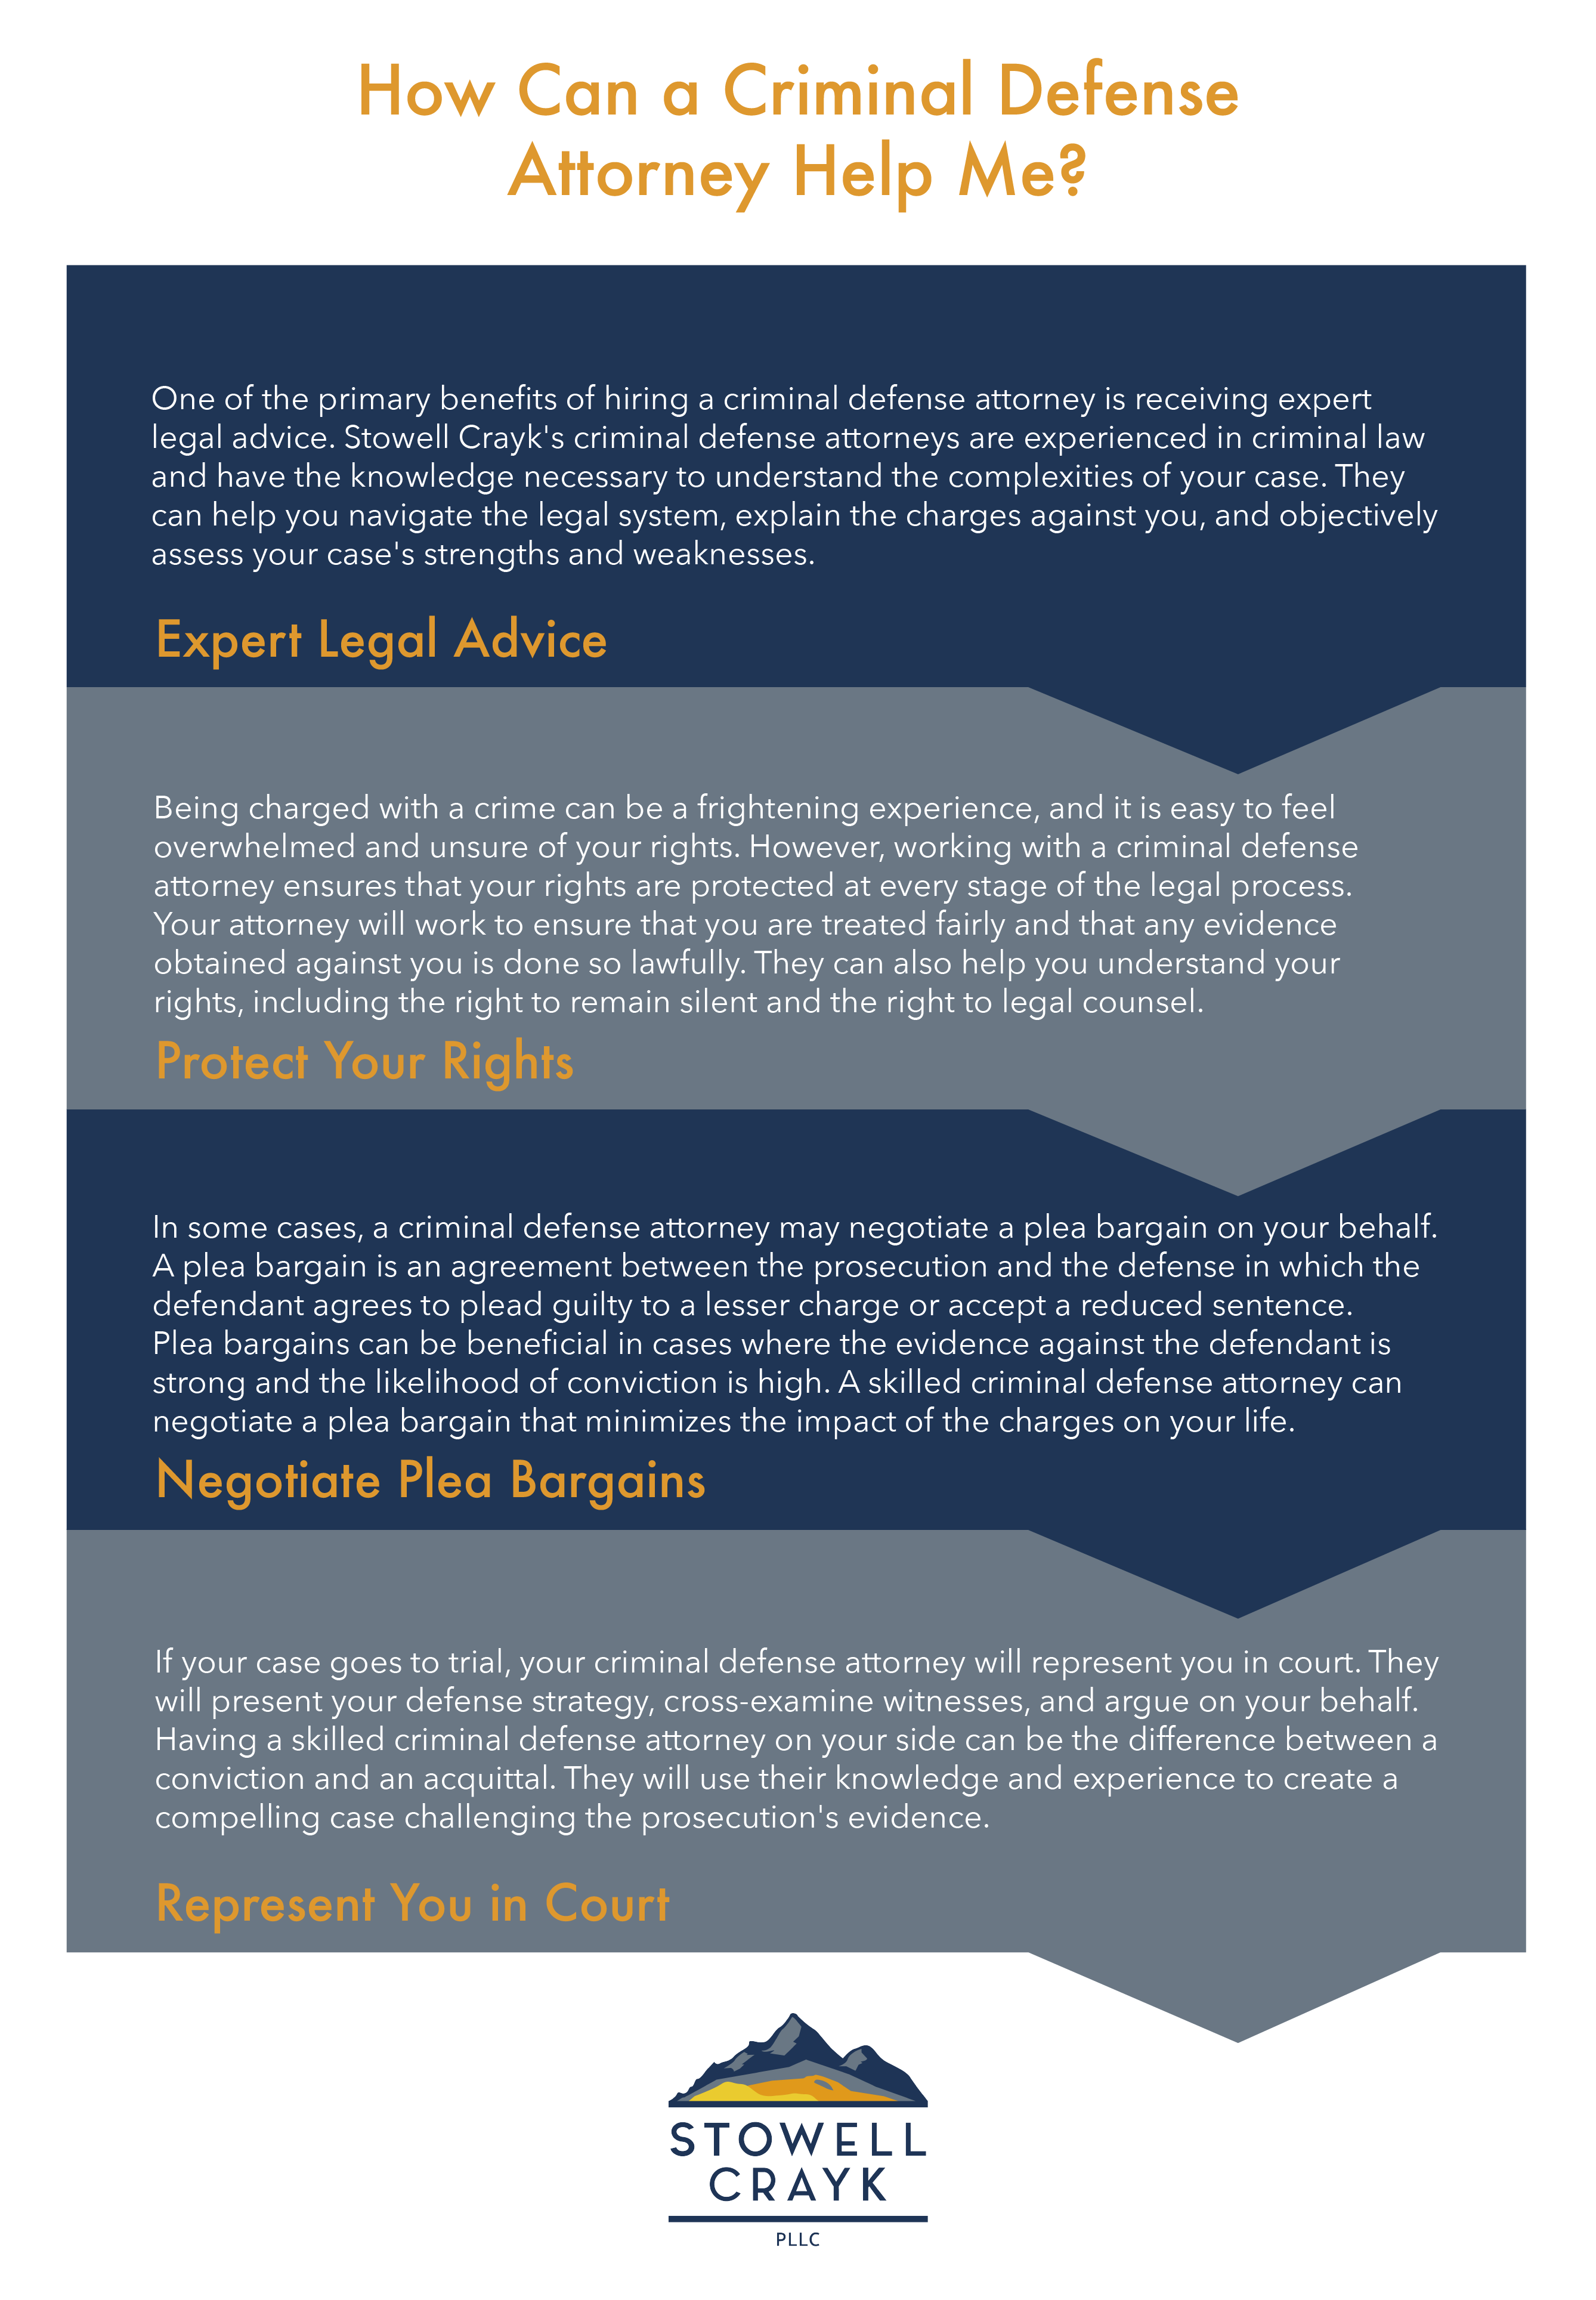 How Can a Criminal Defense Attorney Help Me?